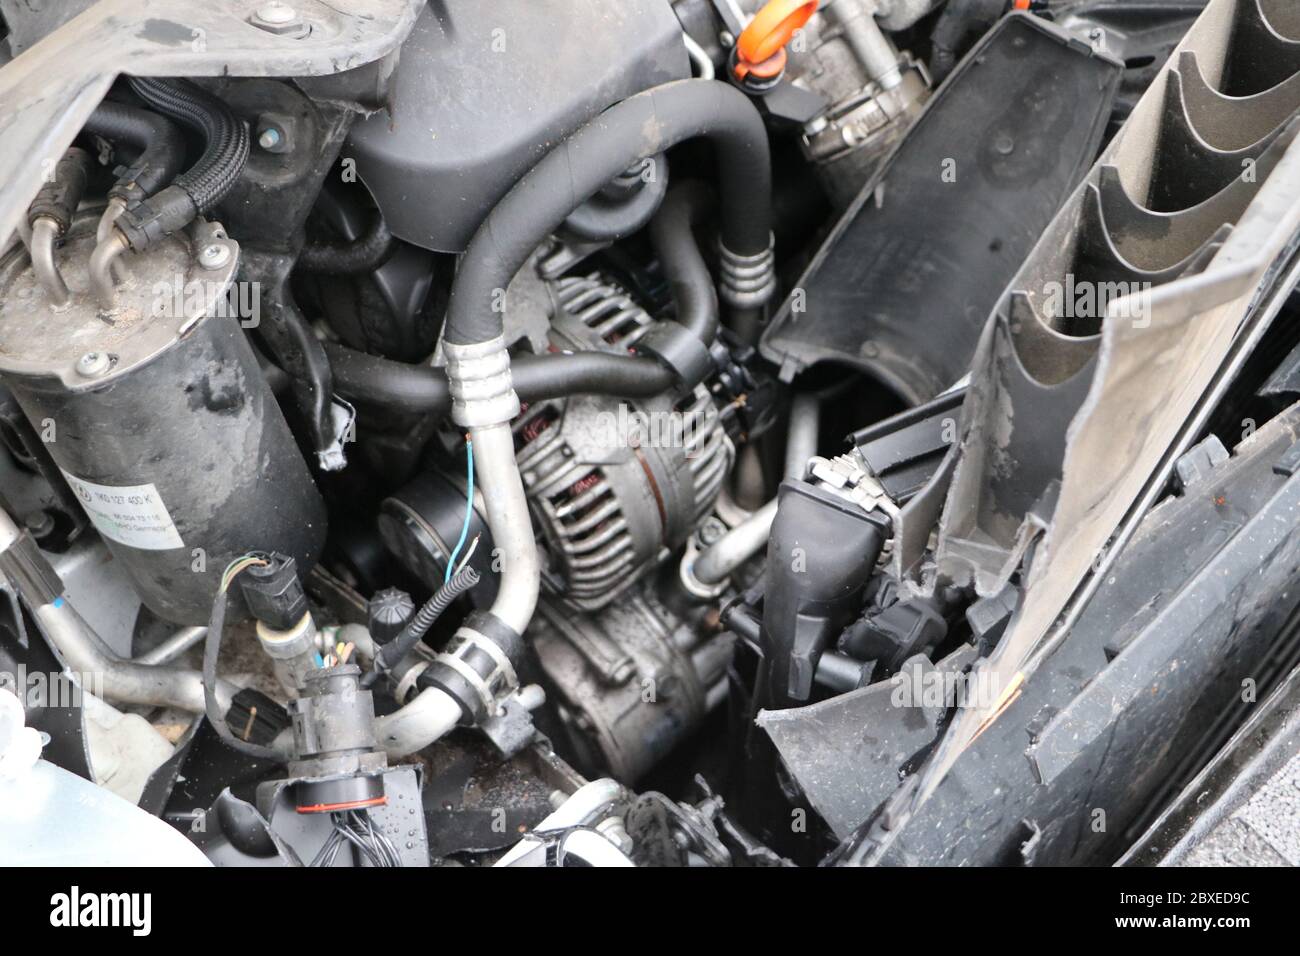 Wrecked car engine close-up, Tennessee Stock Photo